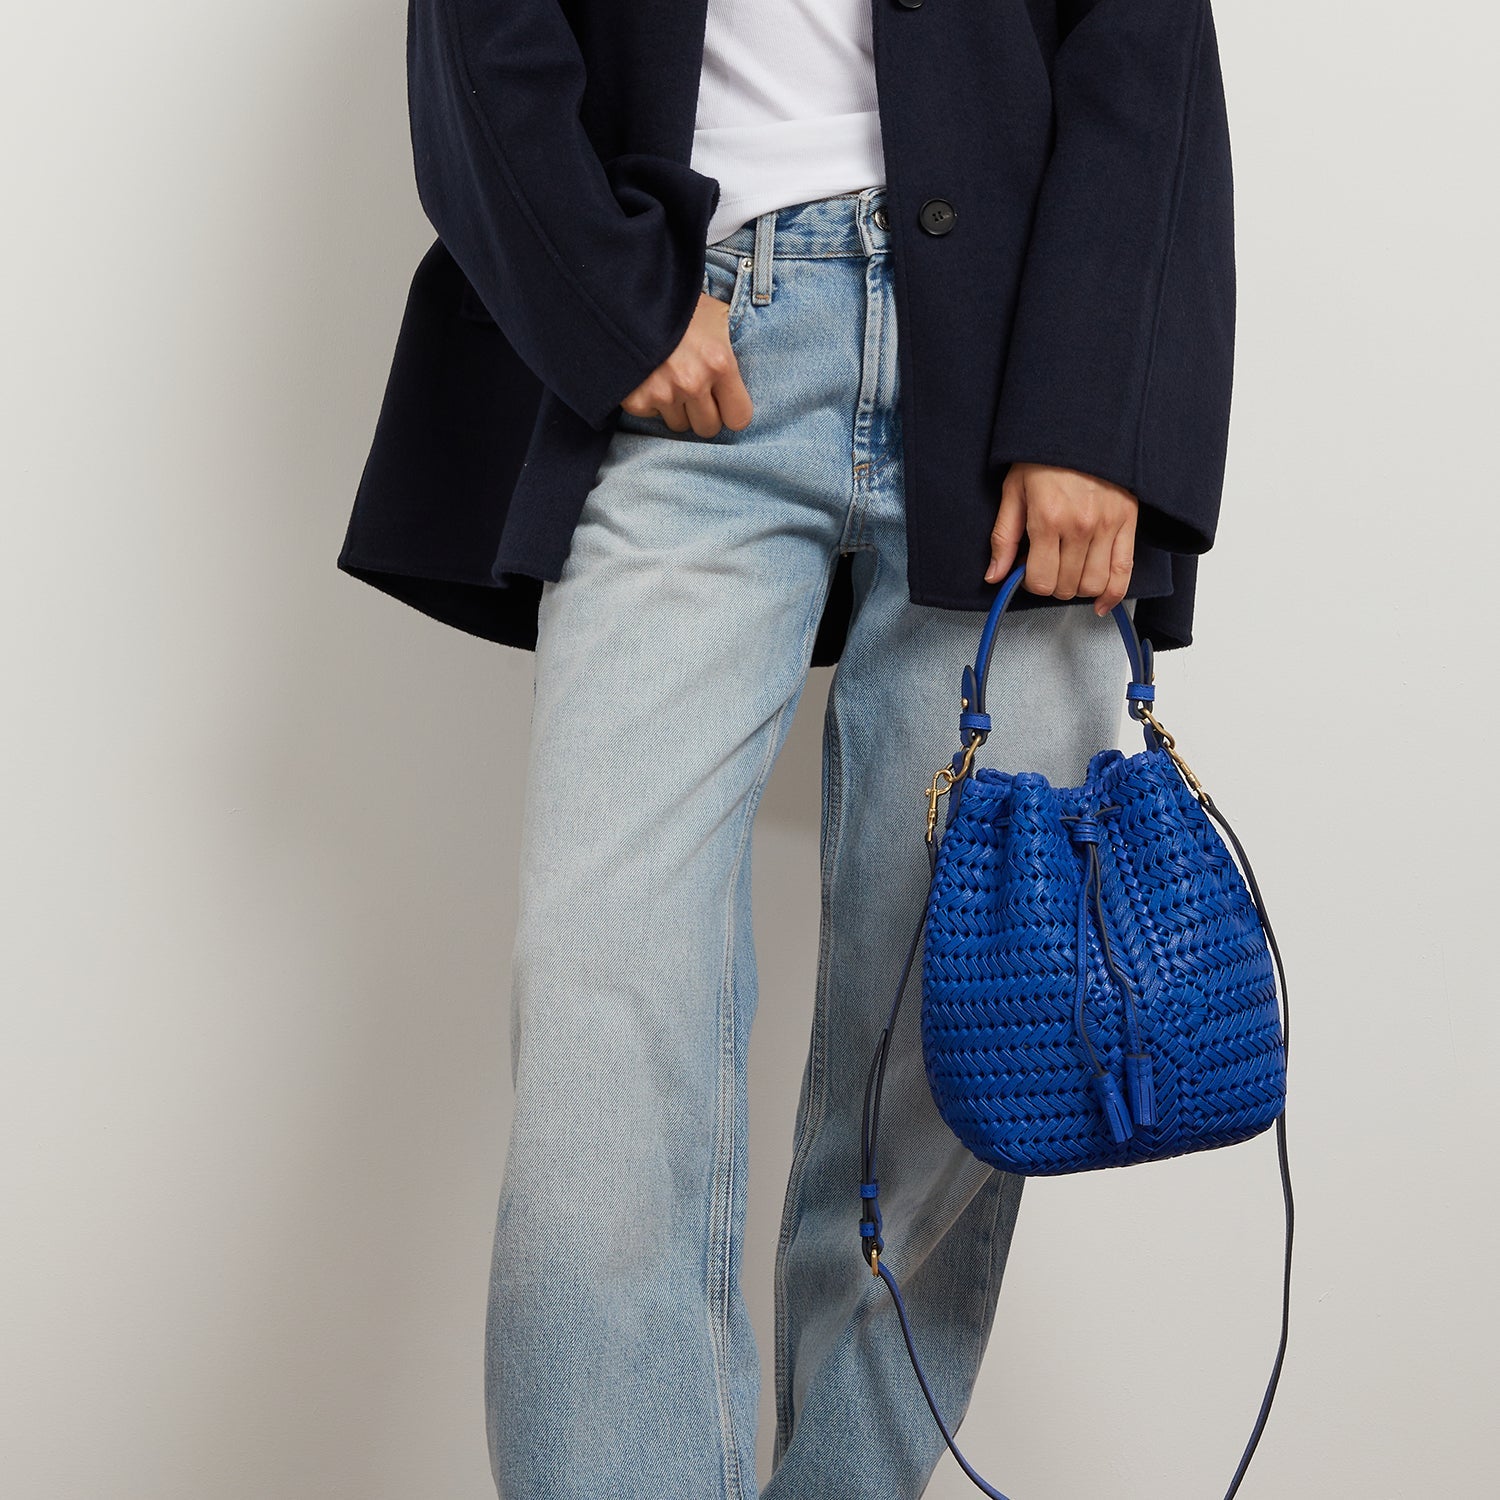 Neeson Small Drawstring -

                  
                    Nubuck Leather in Electric Blue -
                  

                  Anya Hindmarch US
